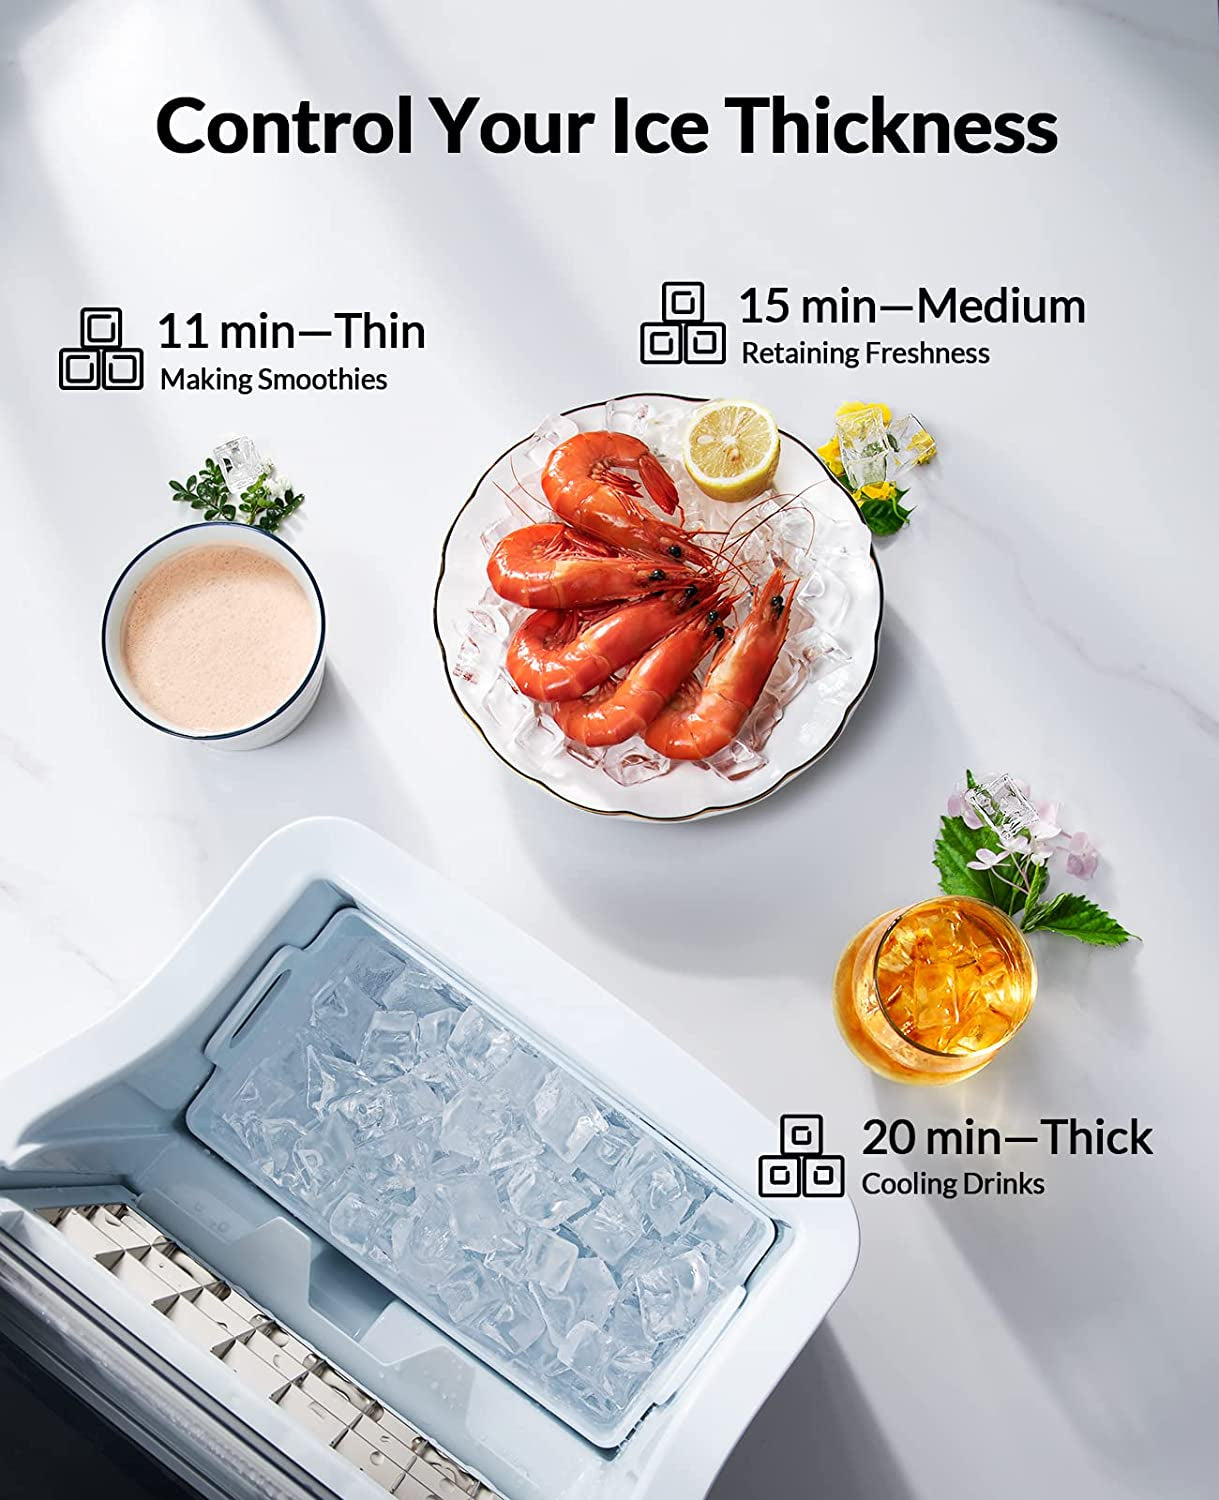 Countertop Ice Maker, 45Lbs per Day, 24Pcs Ice Cubes in 13 Min, 2 Ways to Add Water, Auto Self-Cleaning, Stainless Steel Ice Machine for Home Office Bar Party